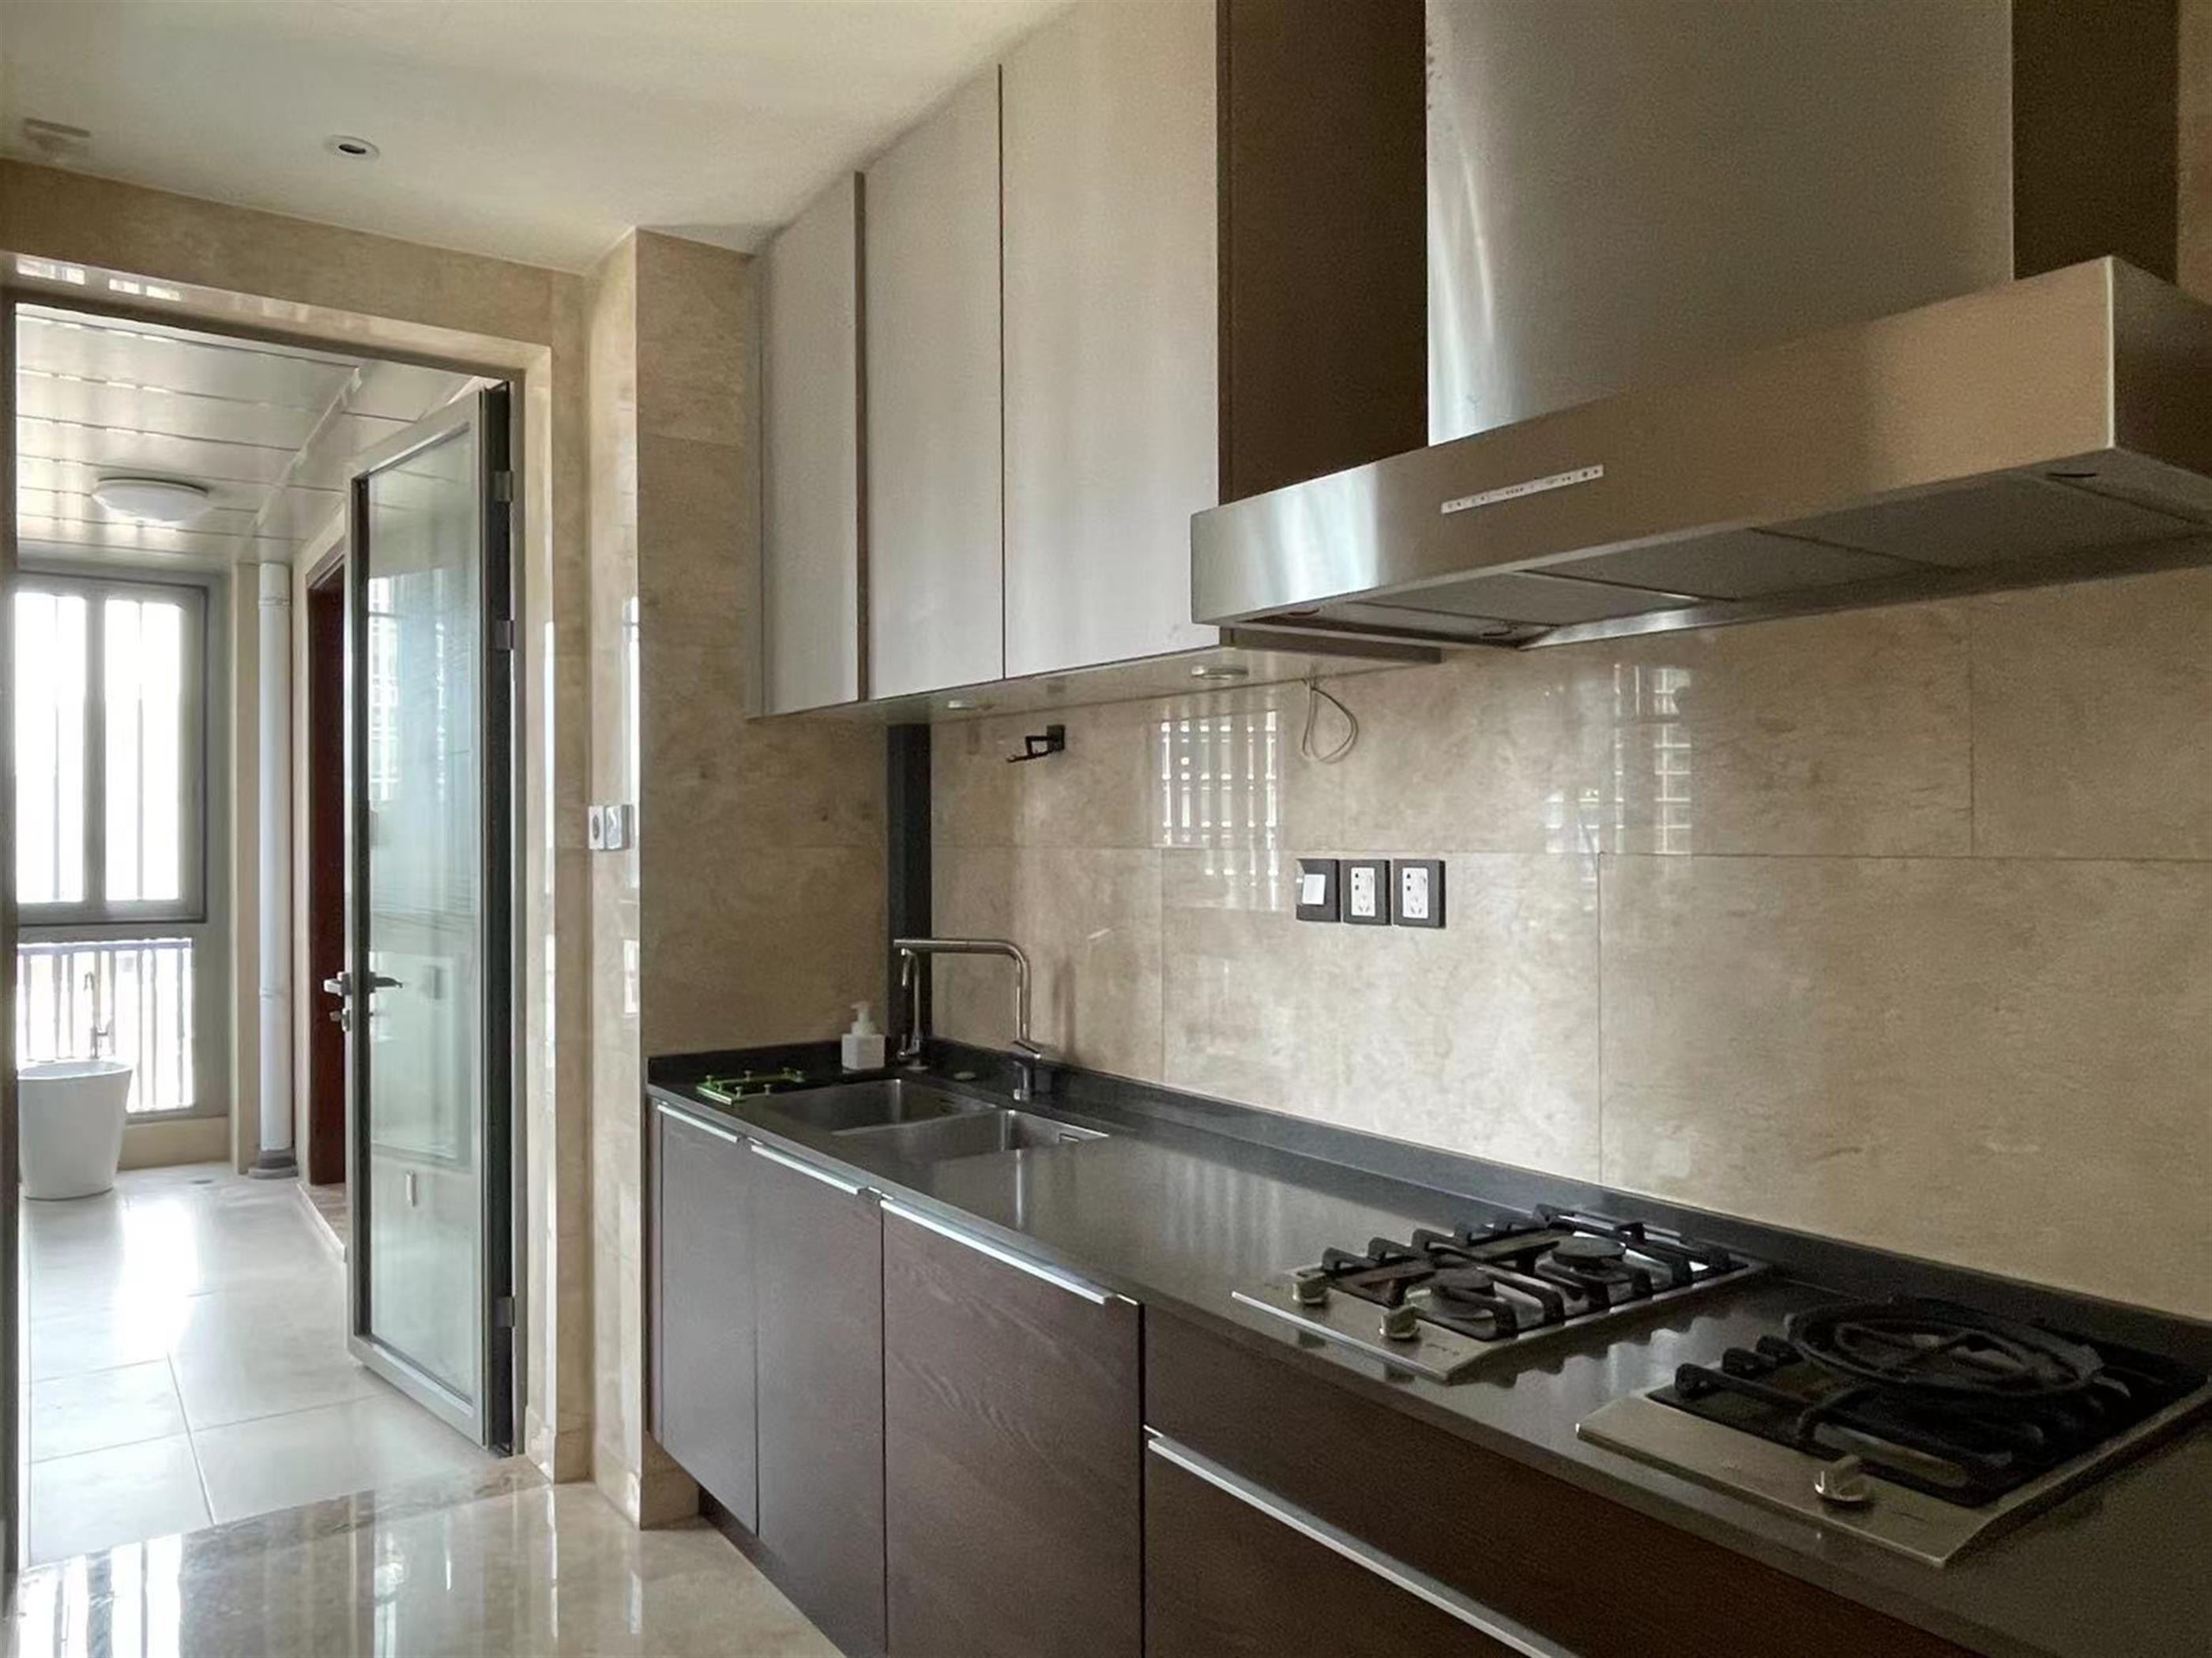 Western kitchen Deluxe Spacious Classic 3BR Apartment for Rent in Shanghai’s Xintiandi Neighborhood